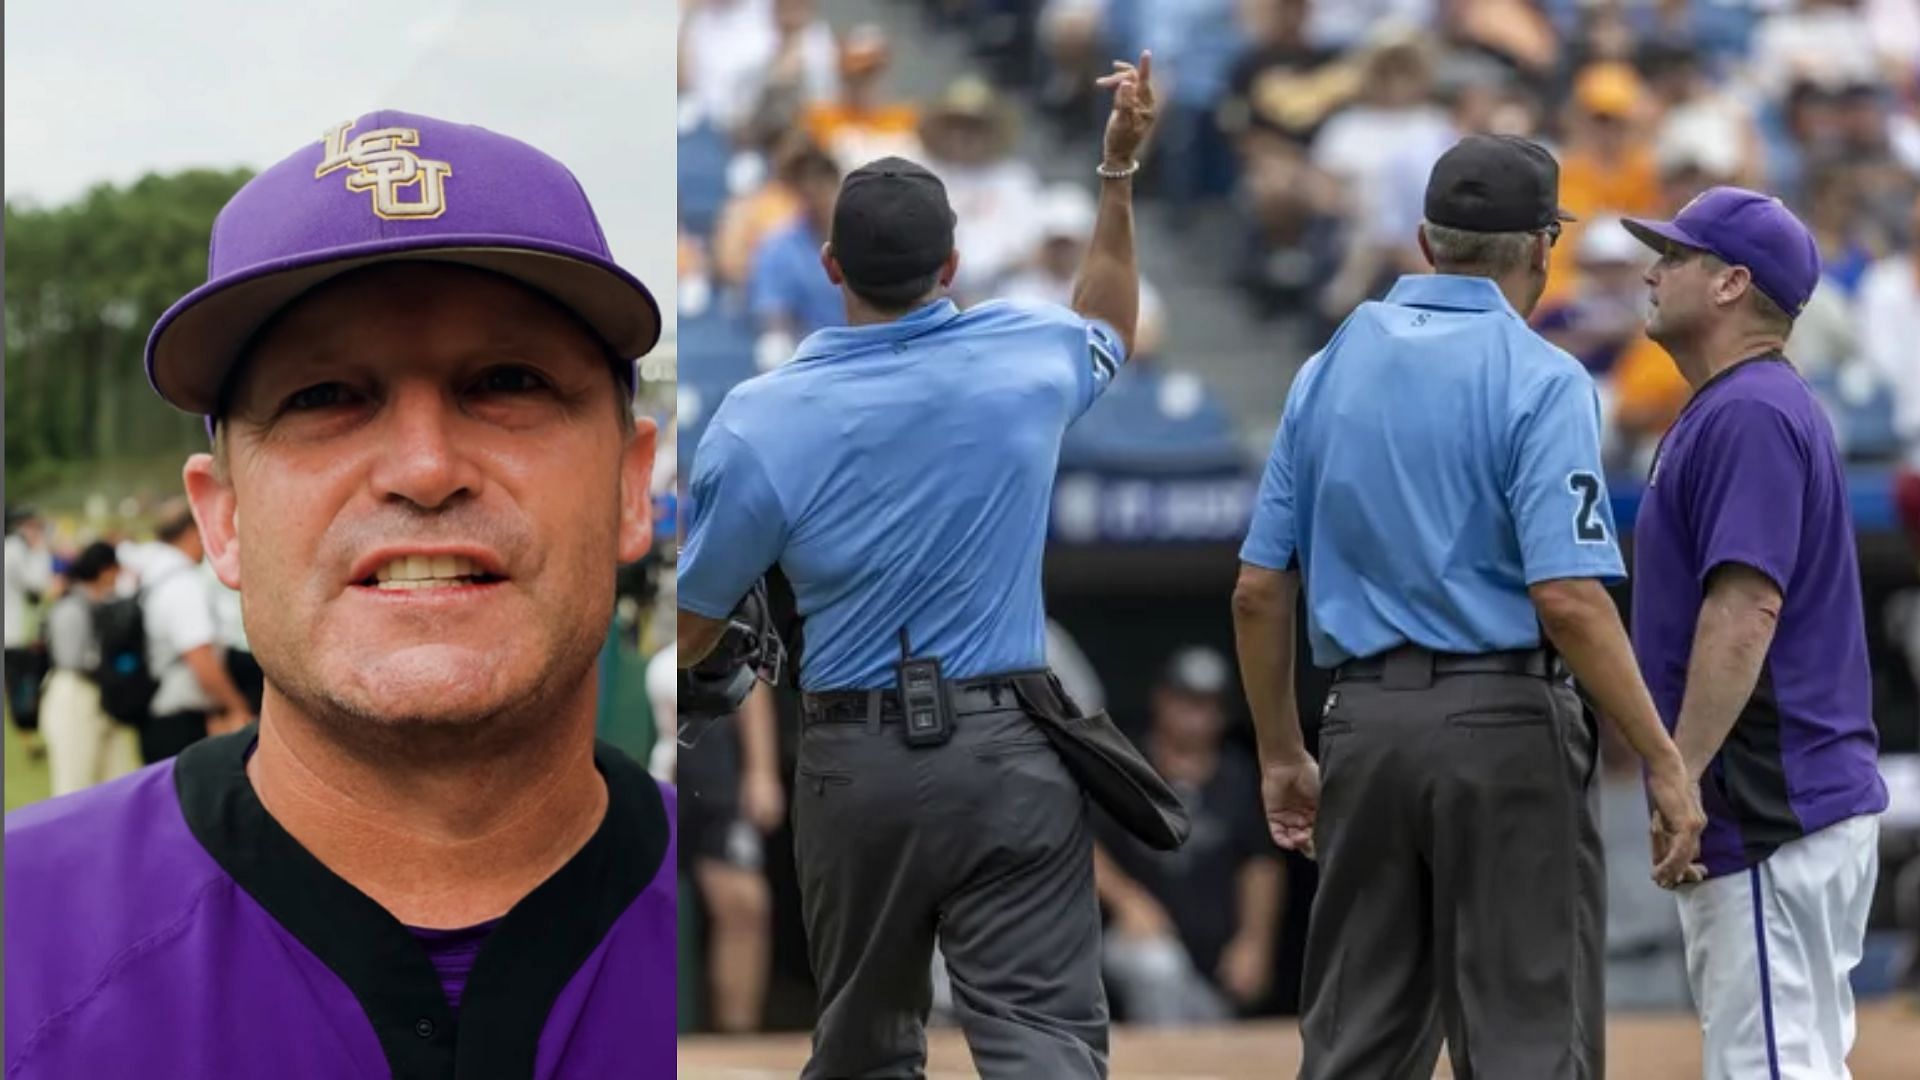 LSU Tigers coach Jay Johnson was ejected in the 10th inning of the SEC Tournament semifinal game against South Carolina.